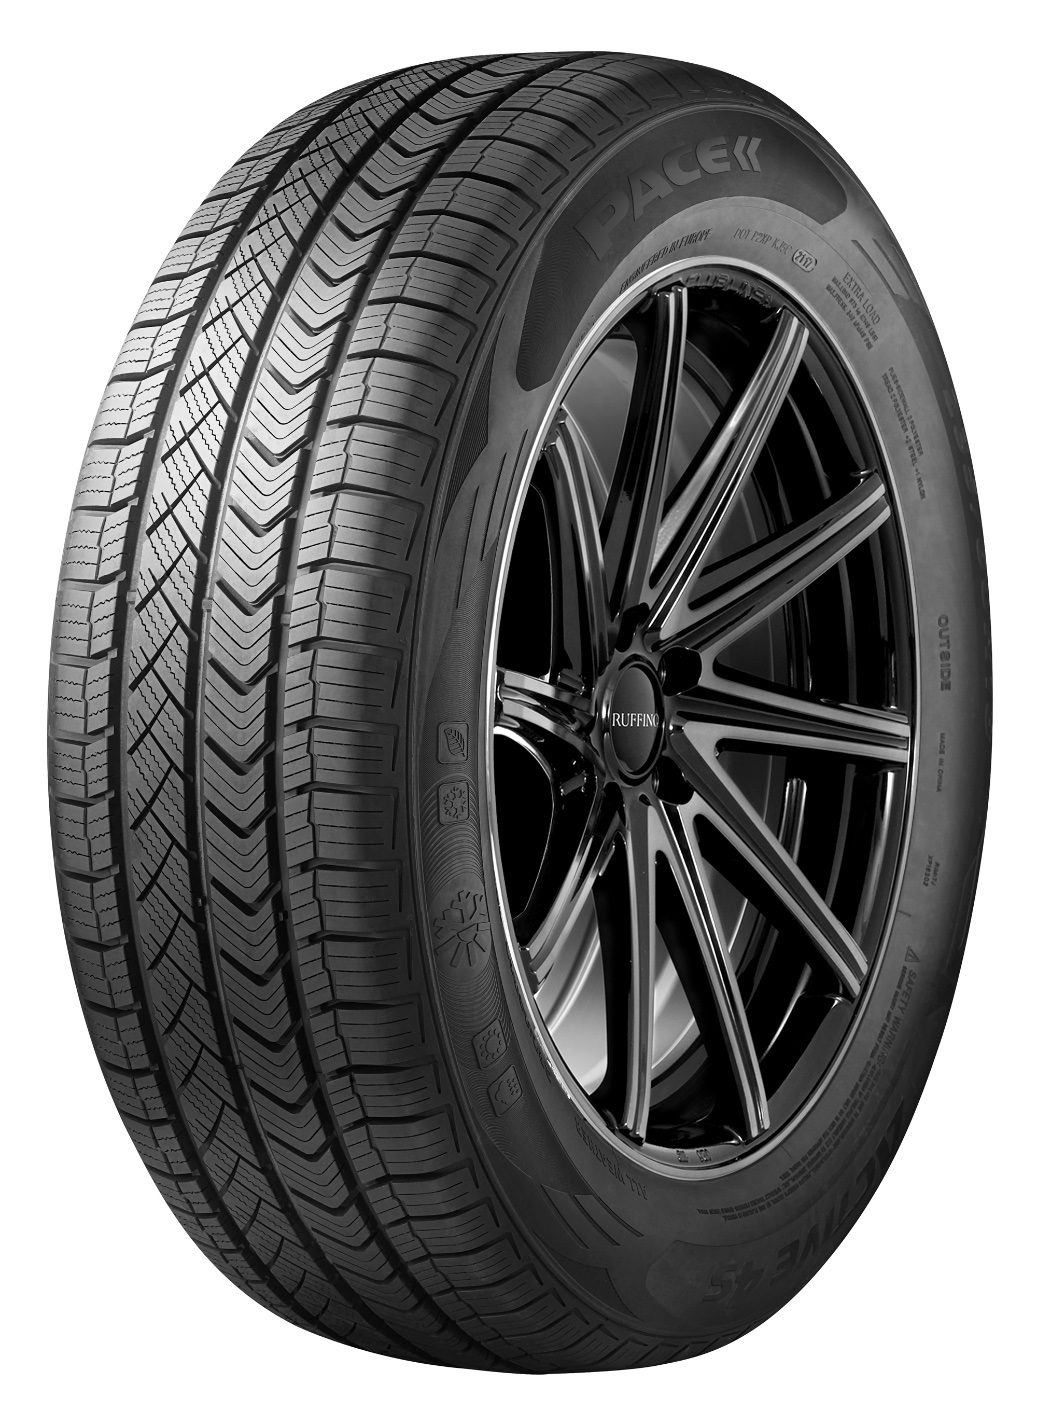 Gomme Nuove Pace 185/55 R15 82H ACTIVE 4S M+S pneumatici nuovi All Season